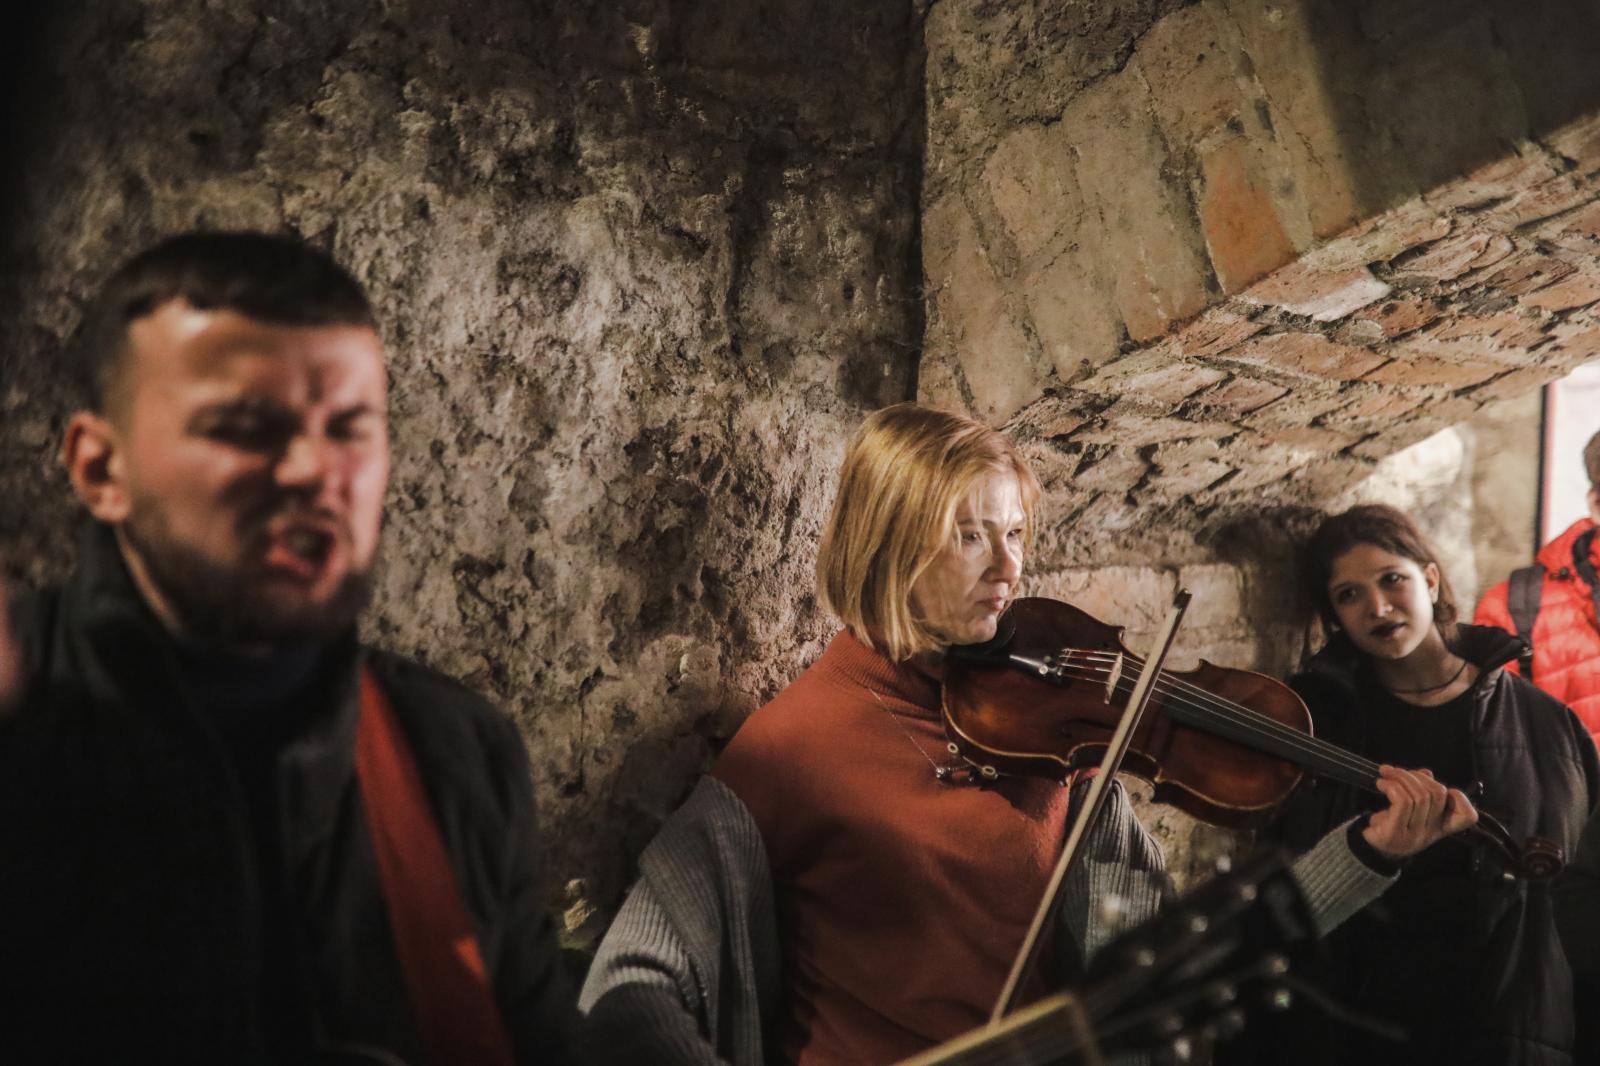 Anadolu/Getty Musicians play music in Lviv to comfort people displaced from war zones - Abril 20, 2022. Musicians play music to try to confort...